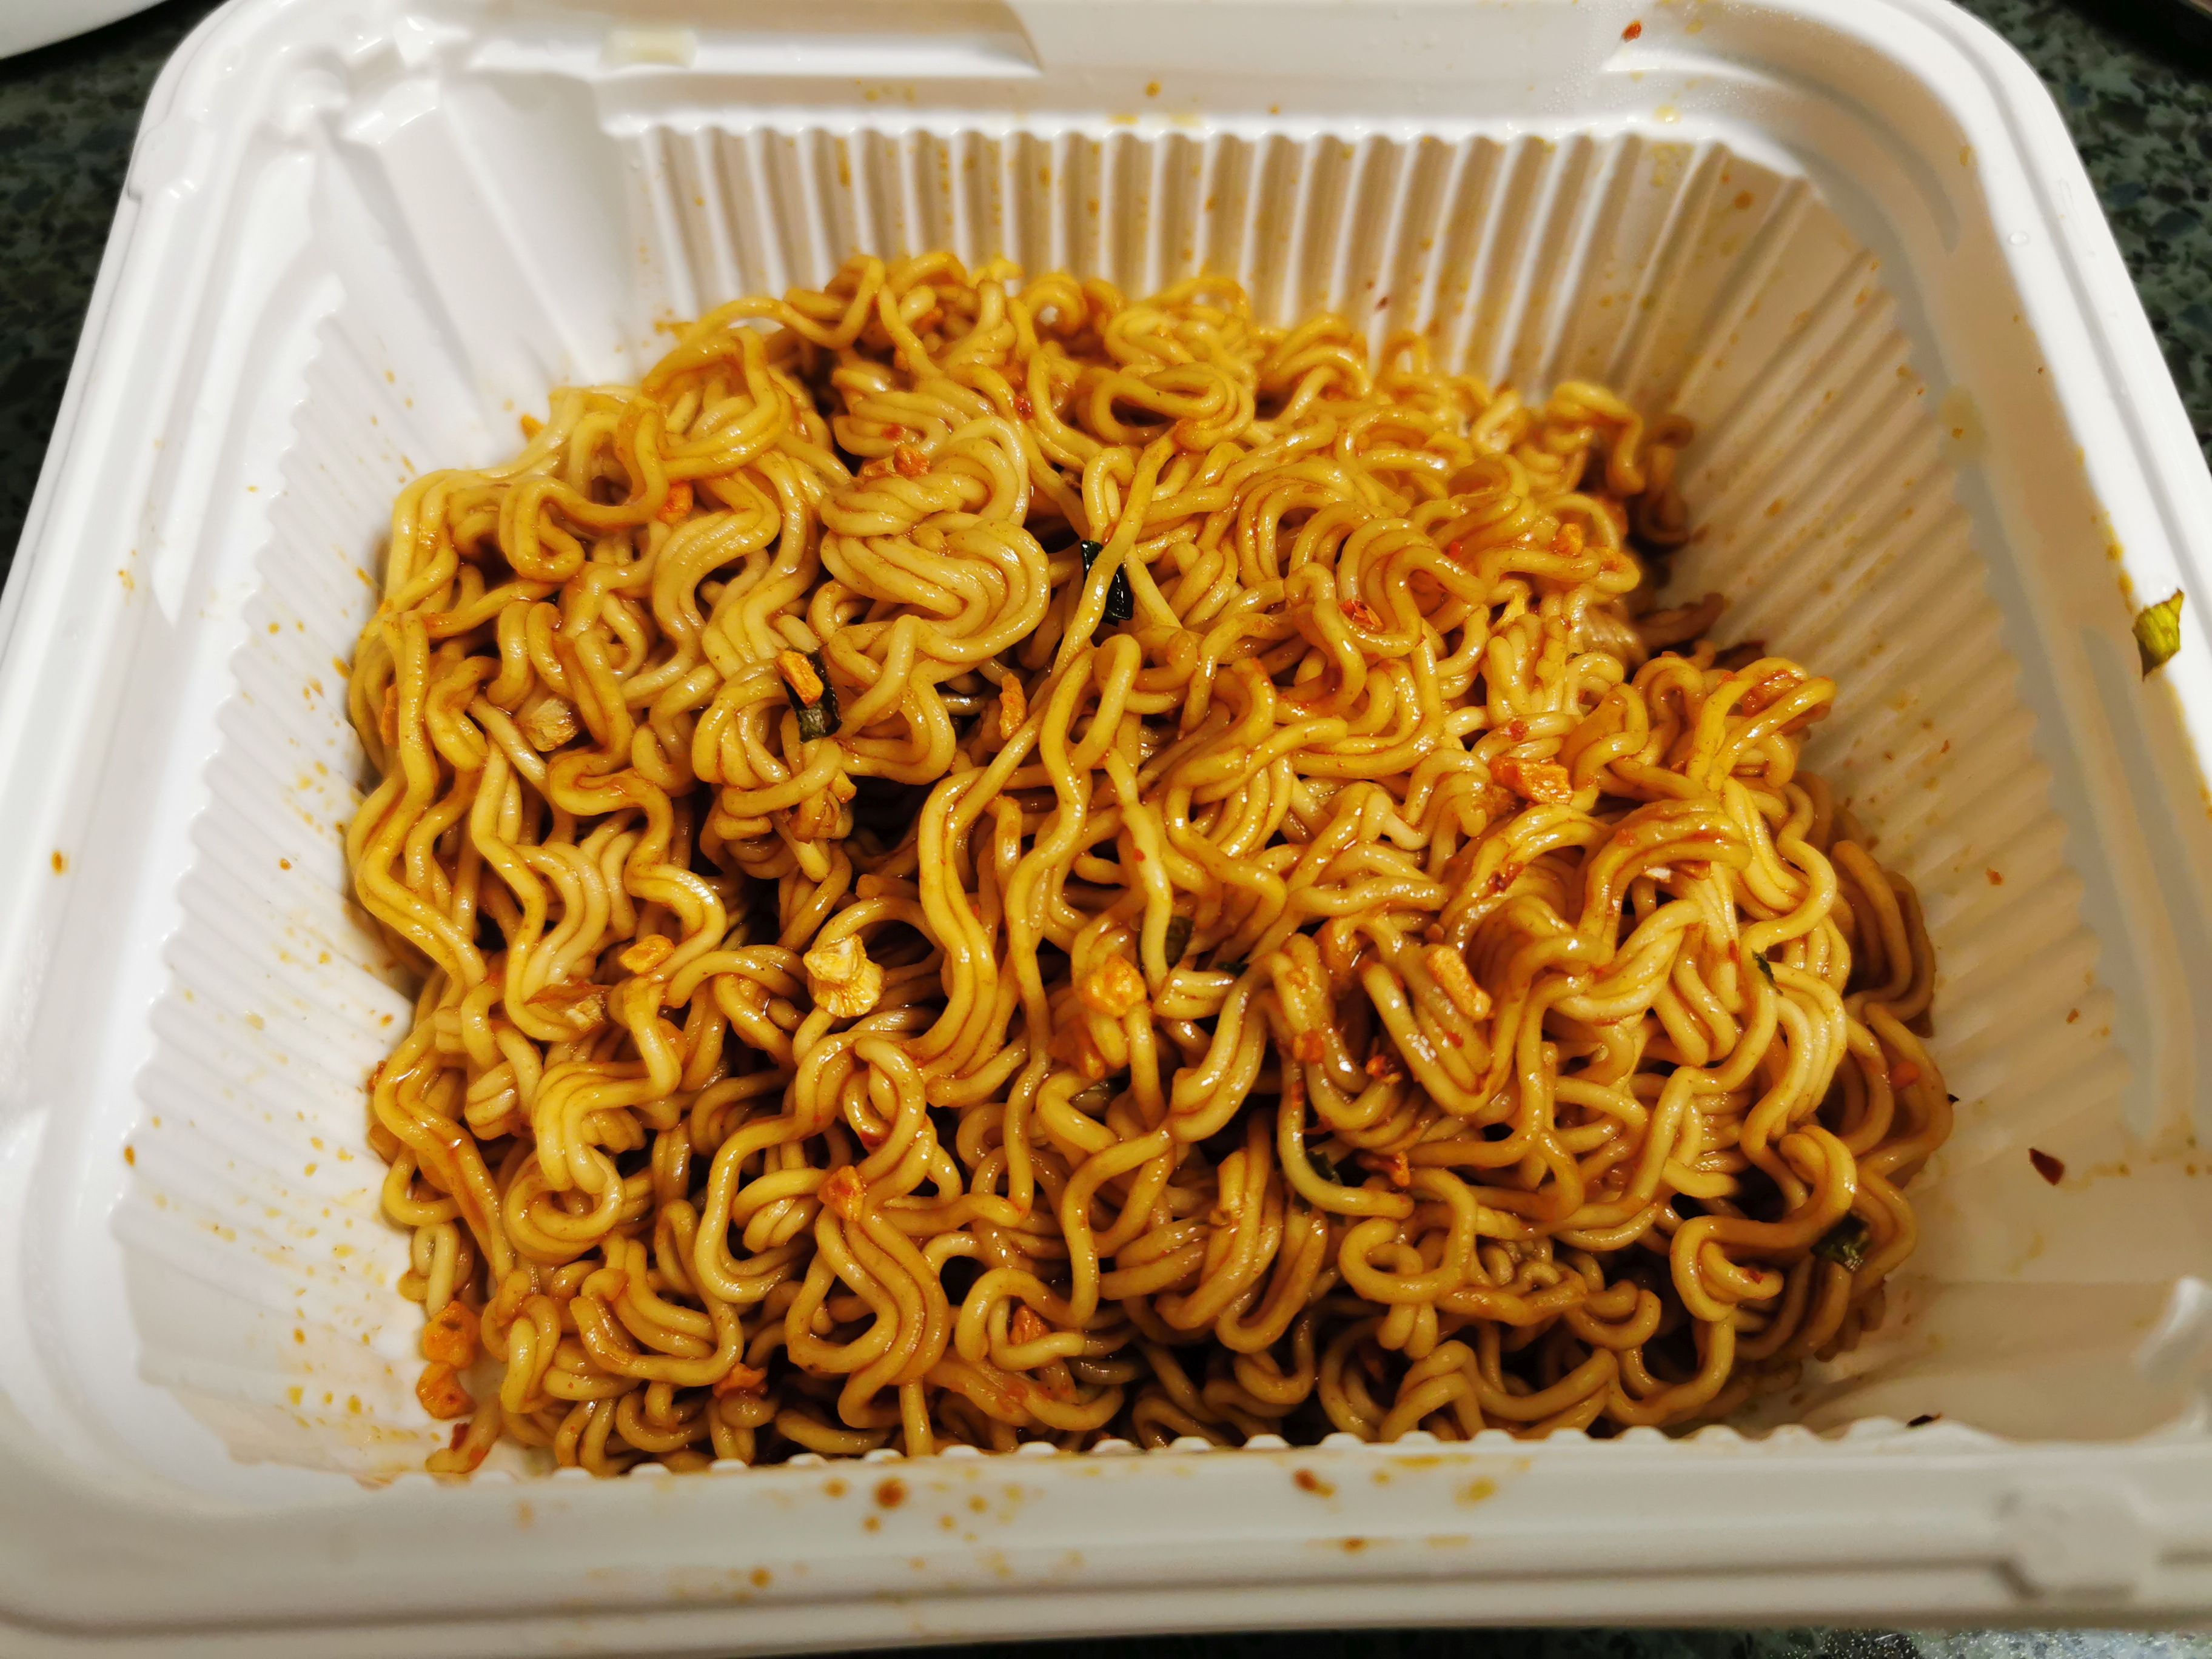 #2173: Doll "Fried Noodle Deep Fried Garlic & Chilli Flavour"